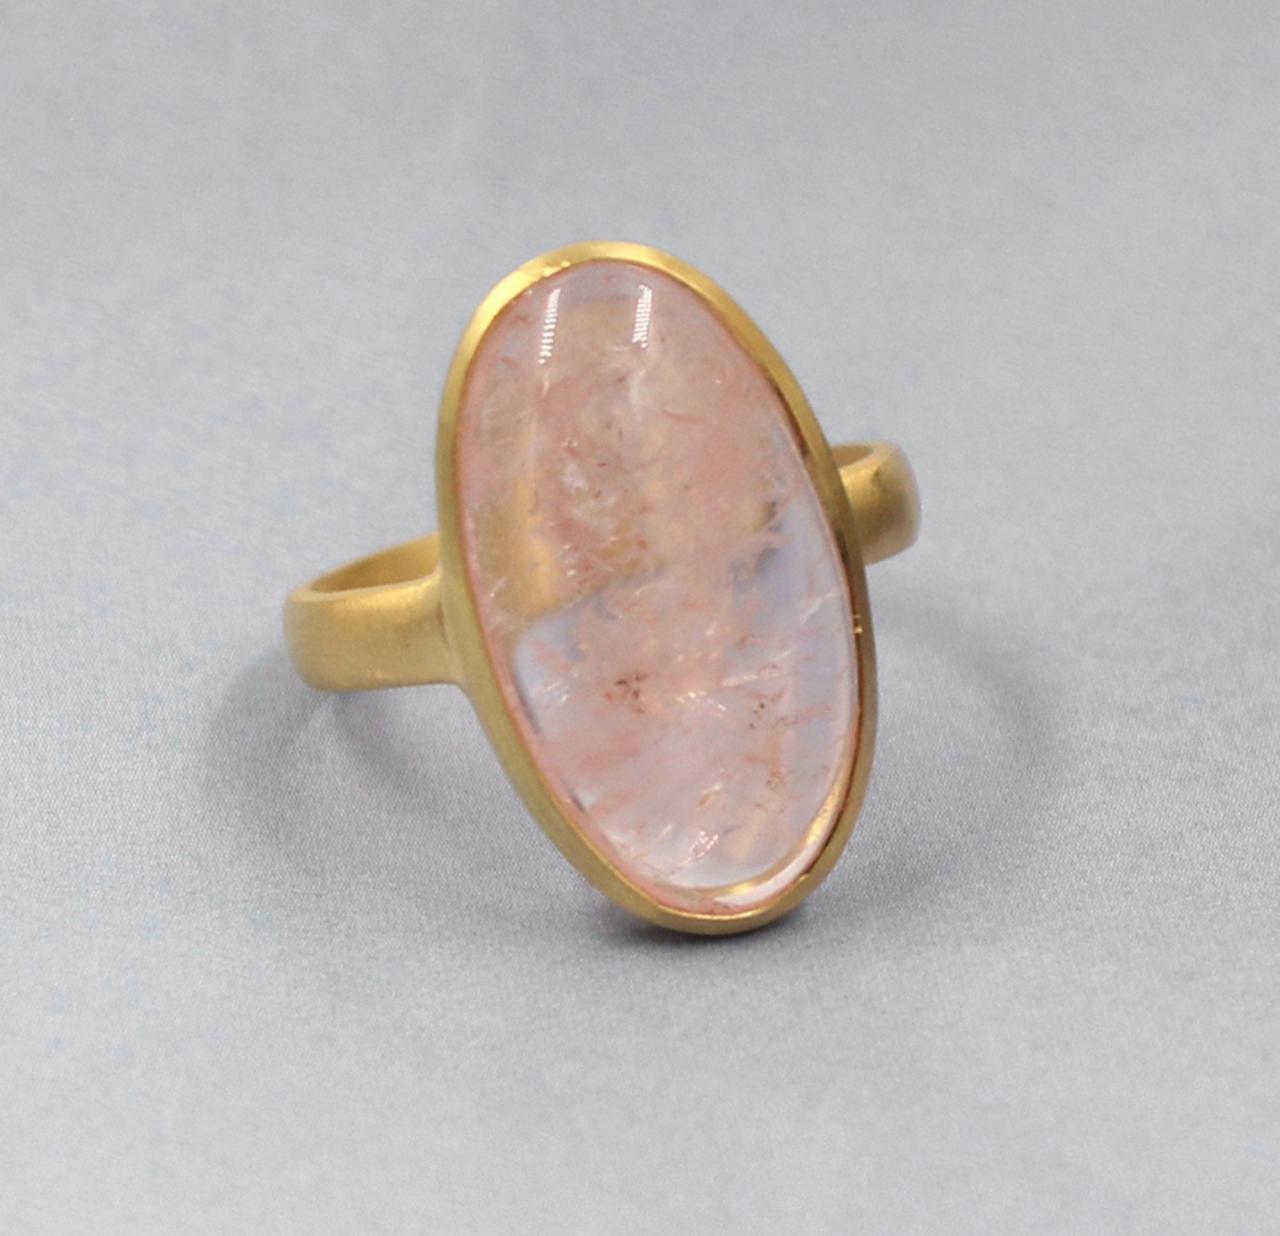 Genuine Morganite Ring,oval Cabochon Gemstone Handmade Men's Ring,solid 925 Sterling Silver Jewelry,engagement Ring